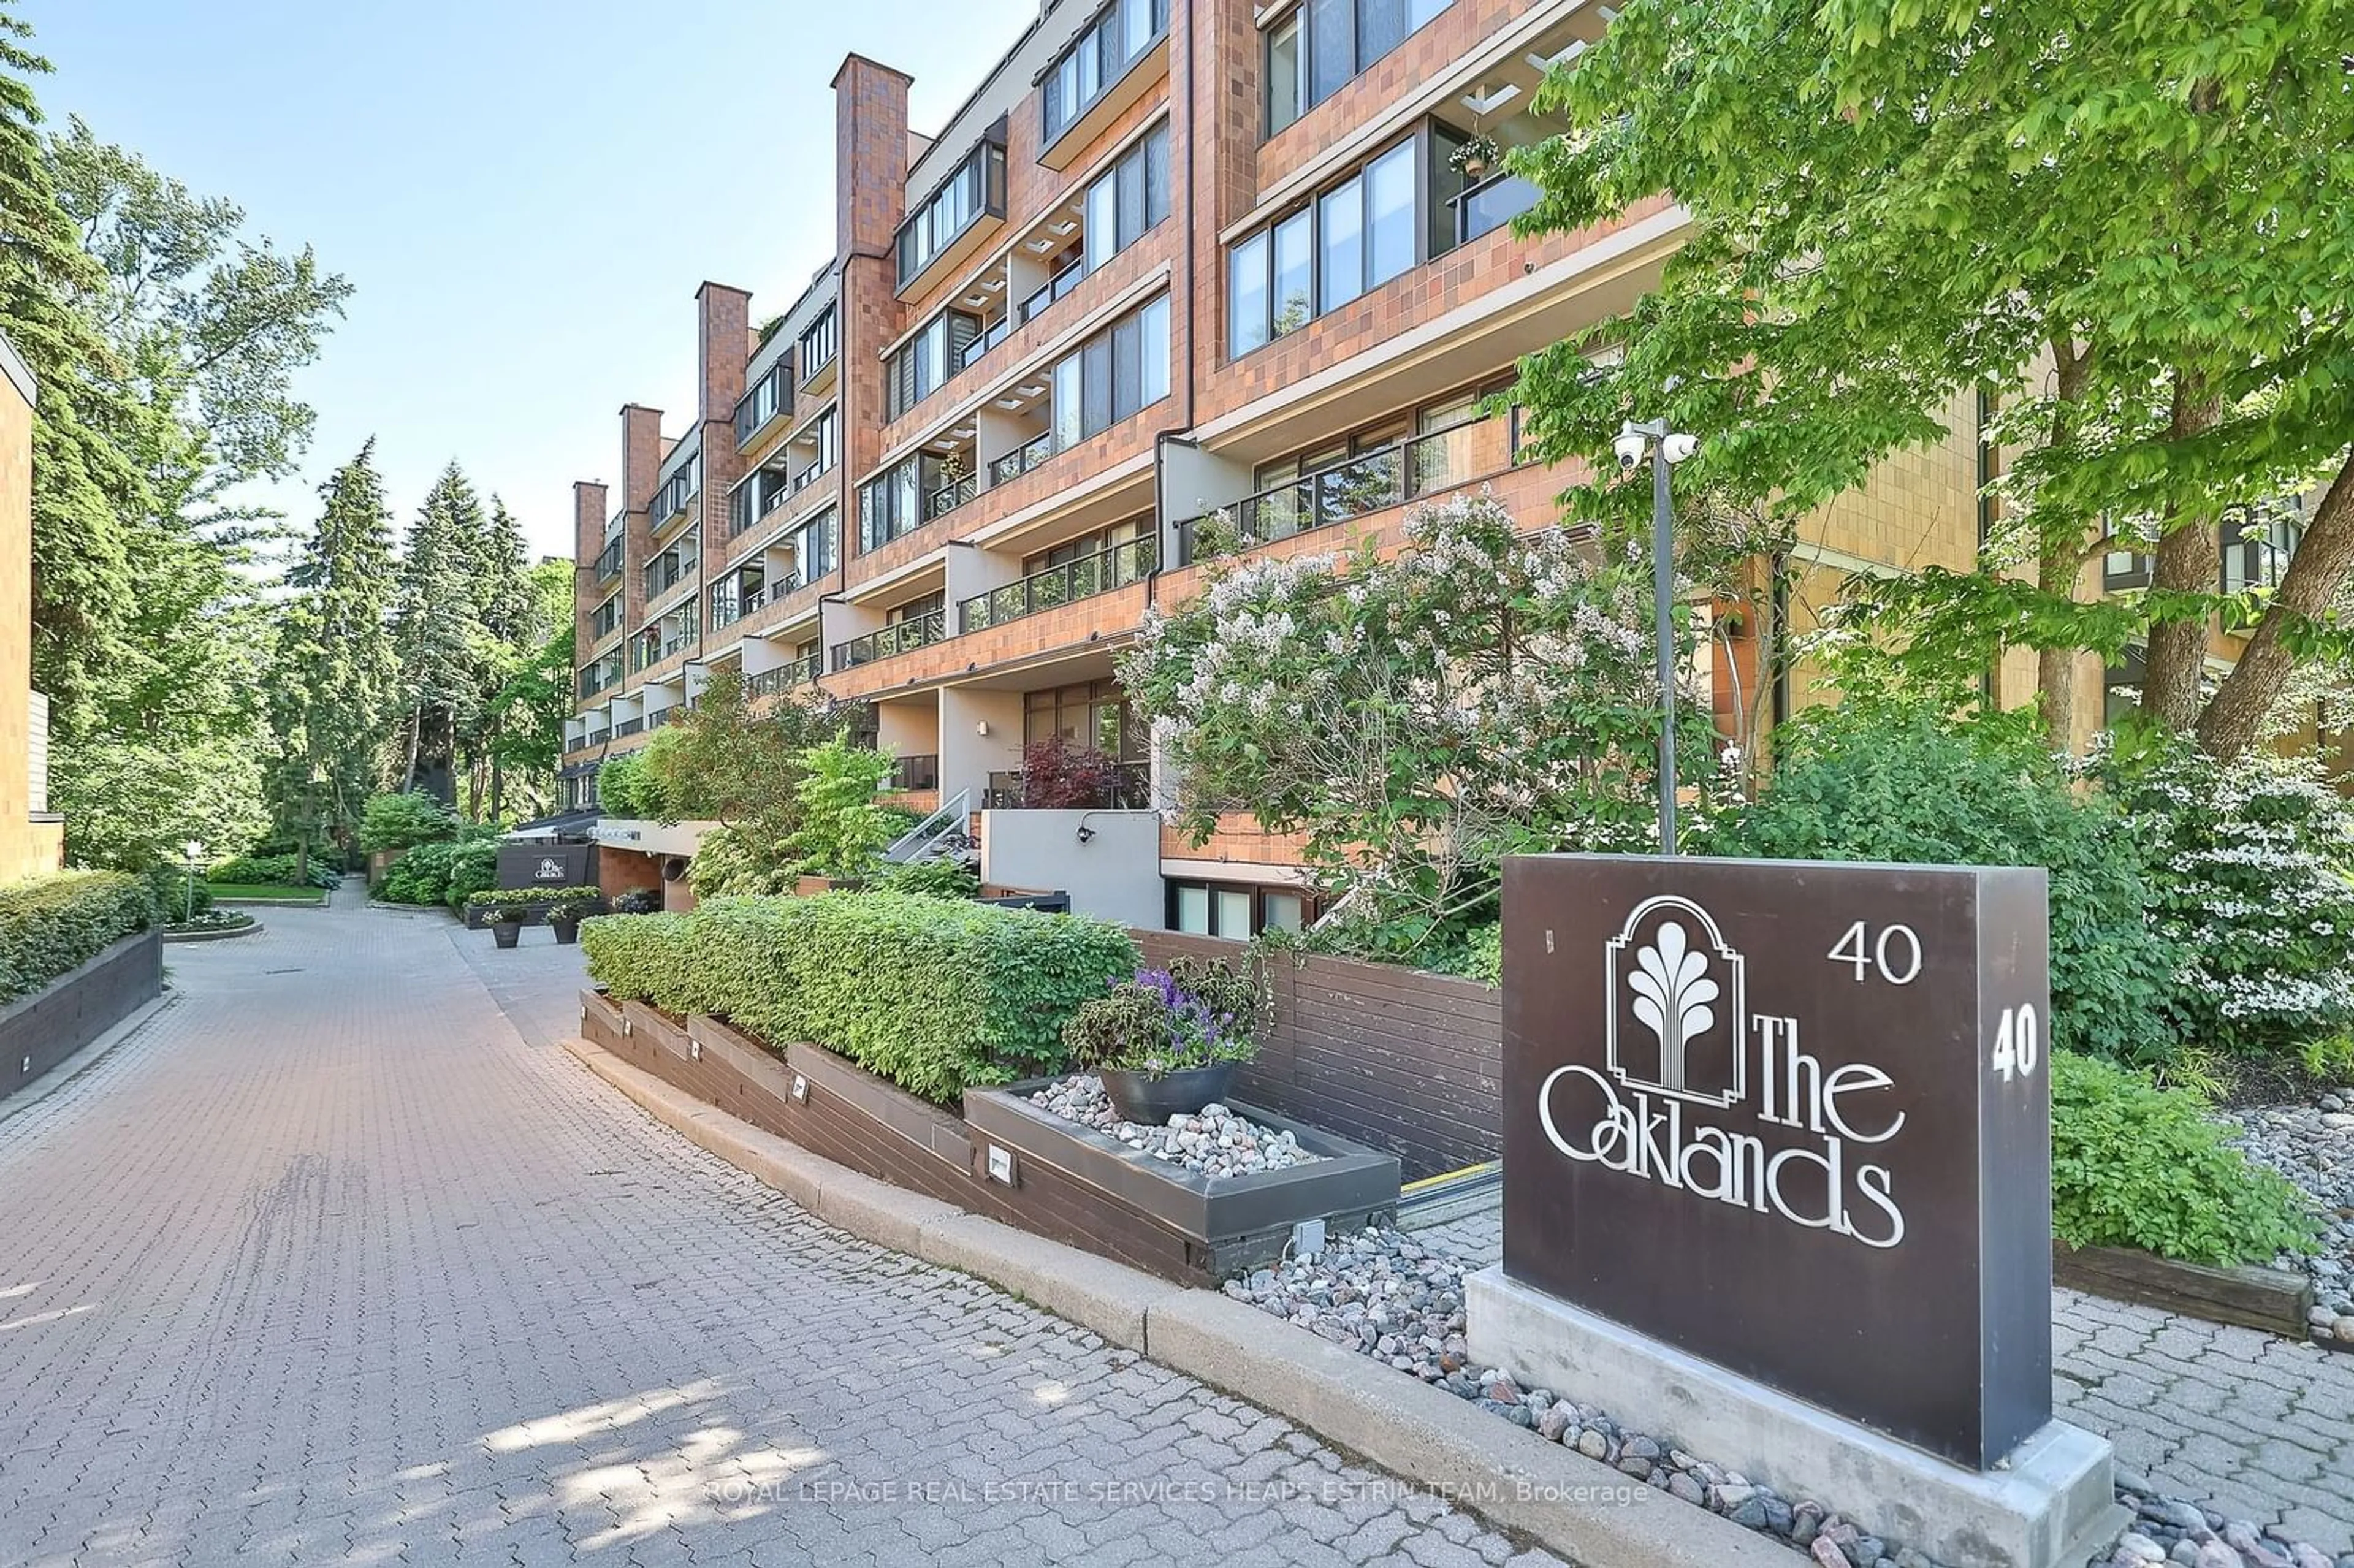 A pic from exterior of the house or condo for 40 Oaklands Ave #337, Toronto Ontario M4V 2Z3